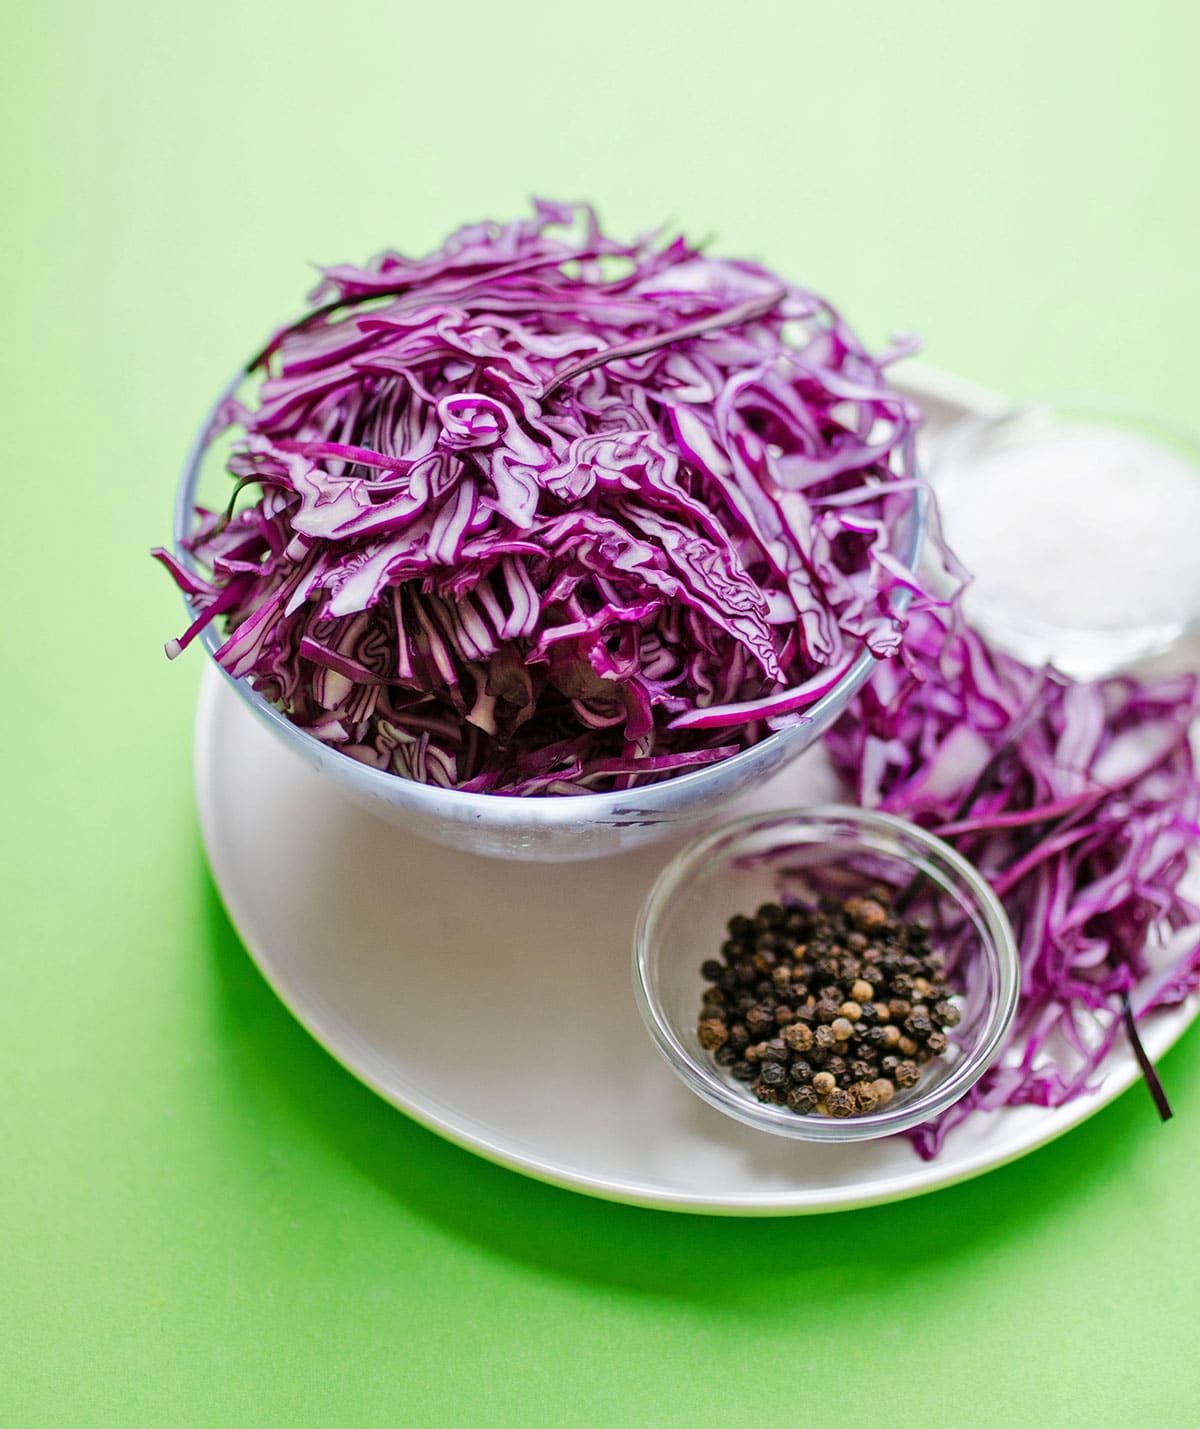 Red cabbage cut in half and shredded on a green background.